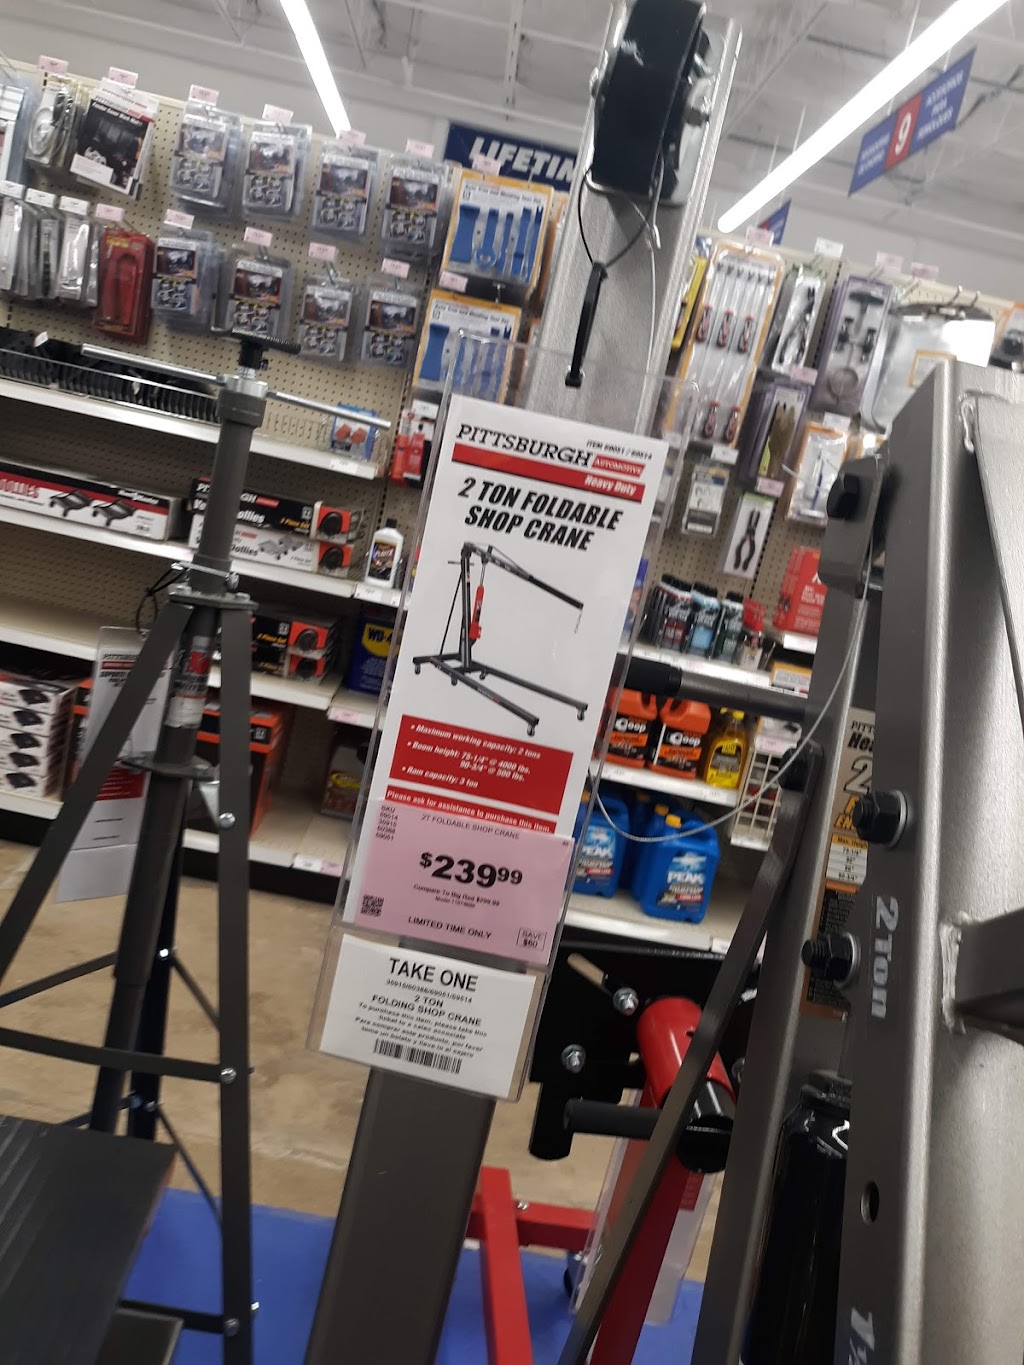 Harbor Freight Tools | 1404 W Moore Ave suite b, Terrell, TX 75160, USA | Phone: (469) 410-7373